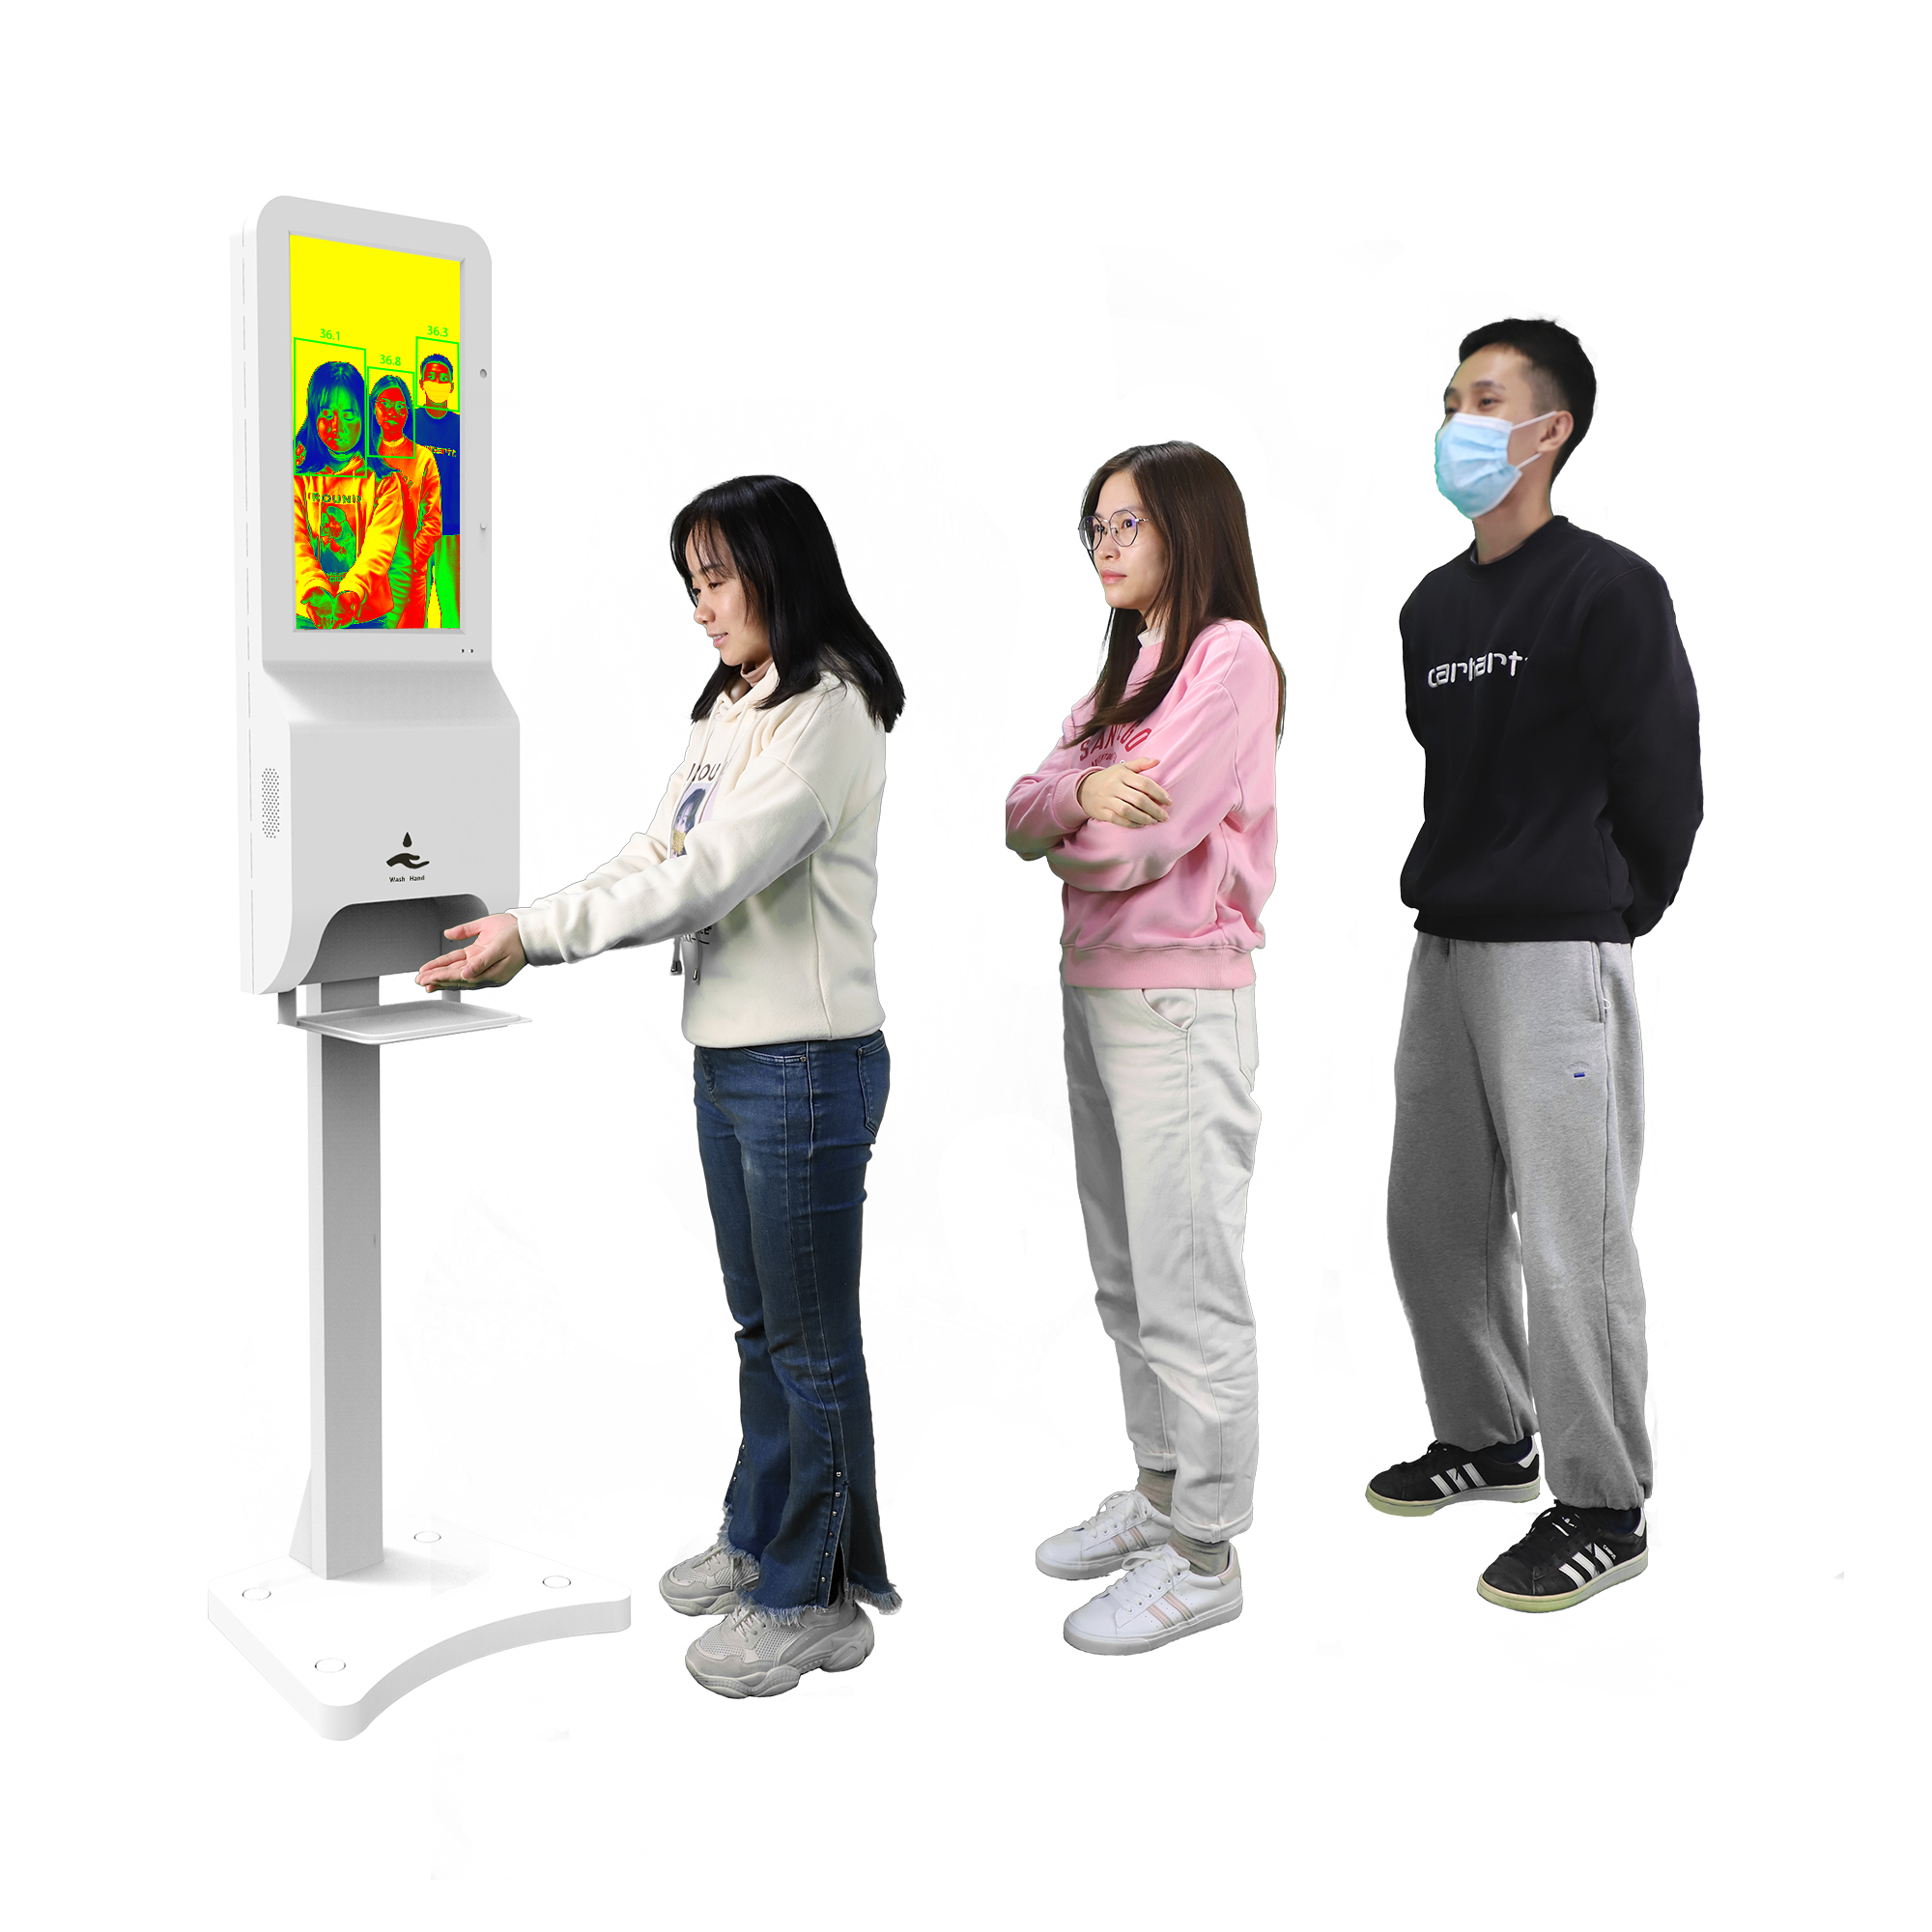 Multi-person thermal imaging temperature measuring and hand washing kiosk